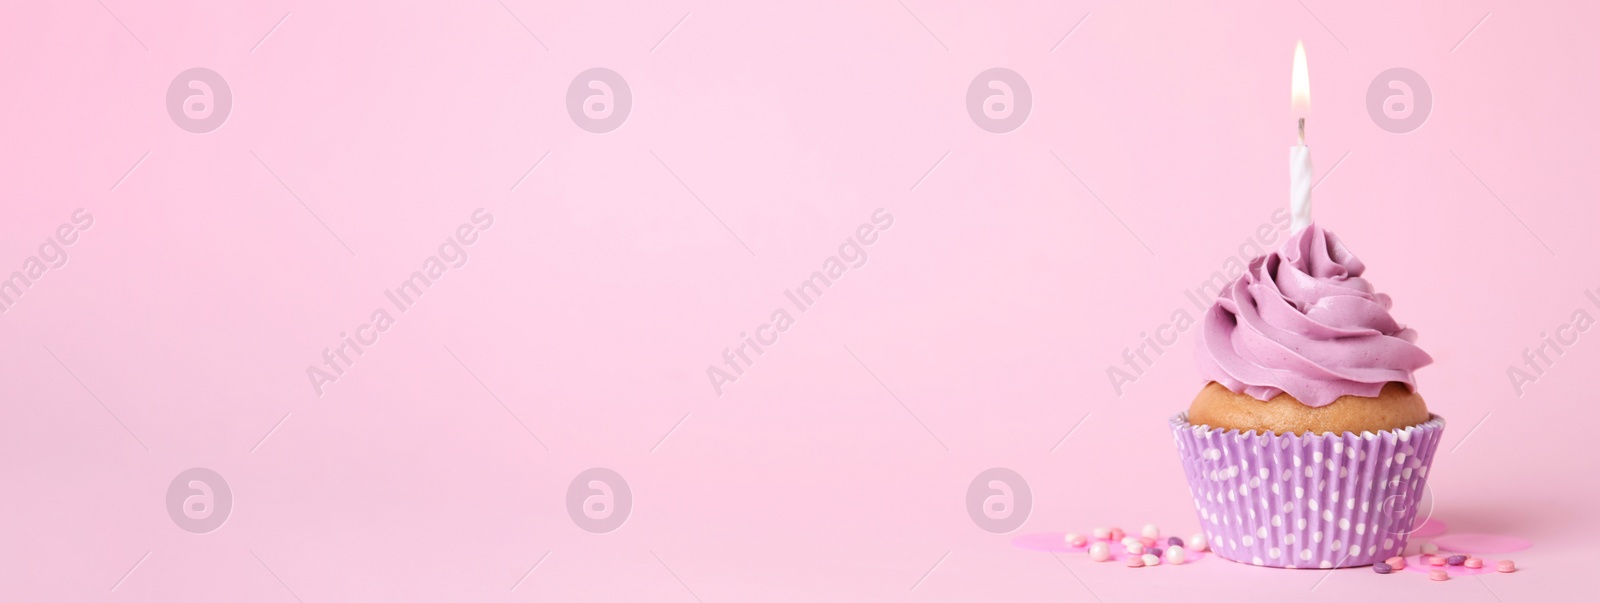 Image of Delicious birthday cupcake with burning candle and sprinkles on pink background, space for text. Banner design